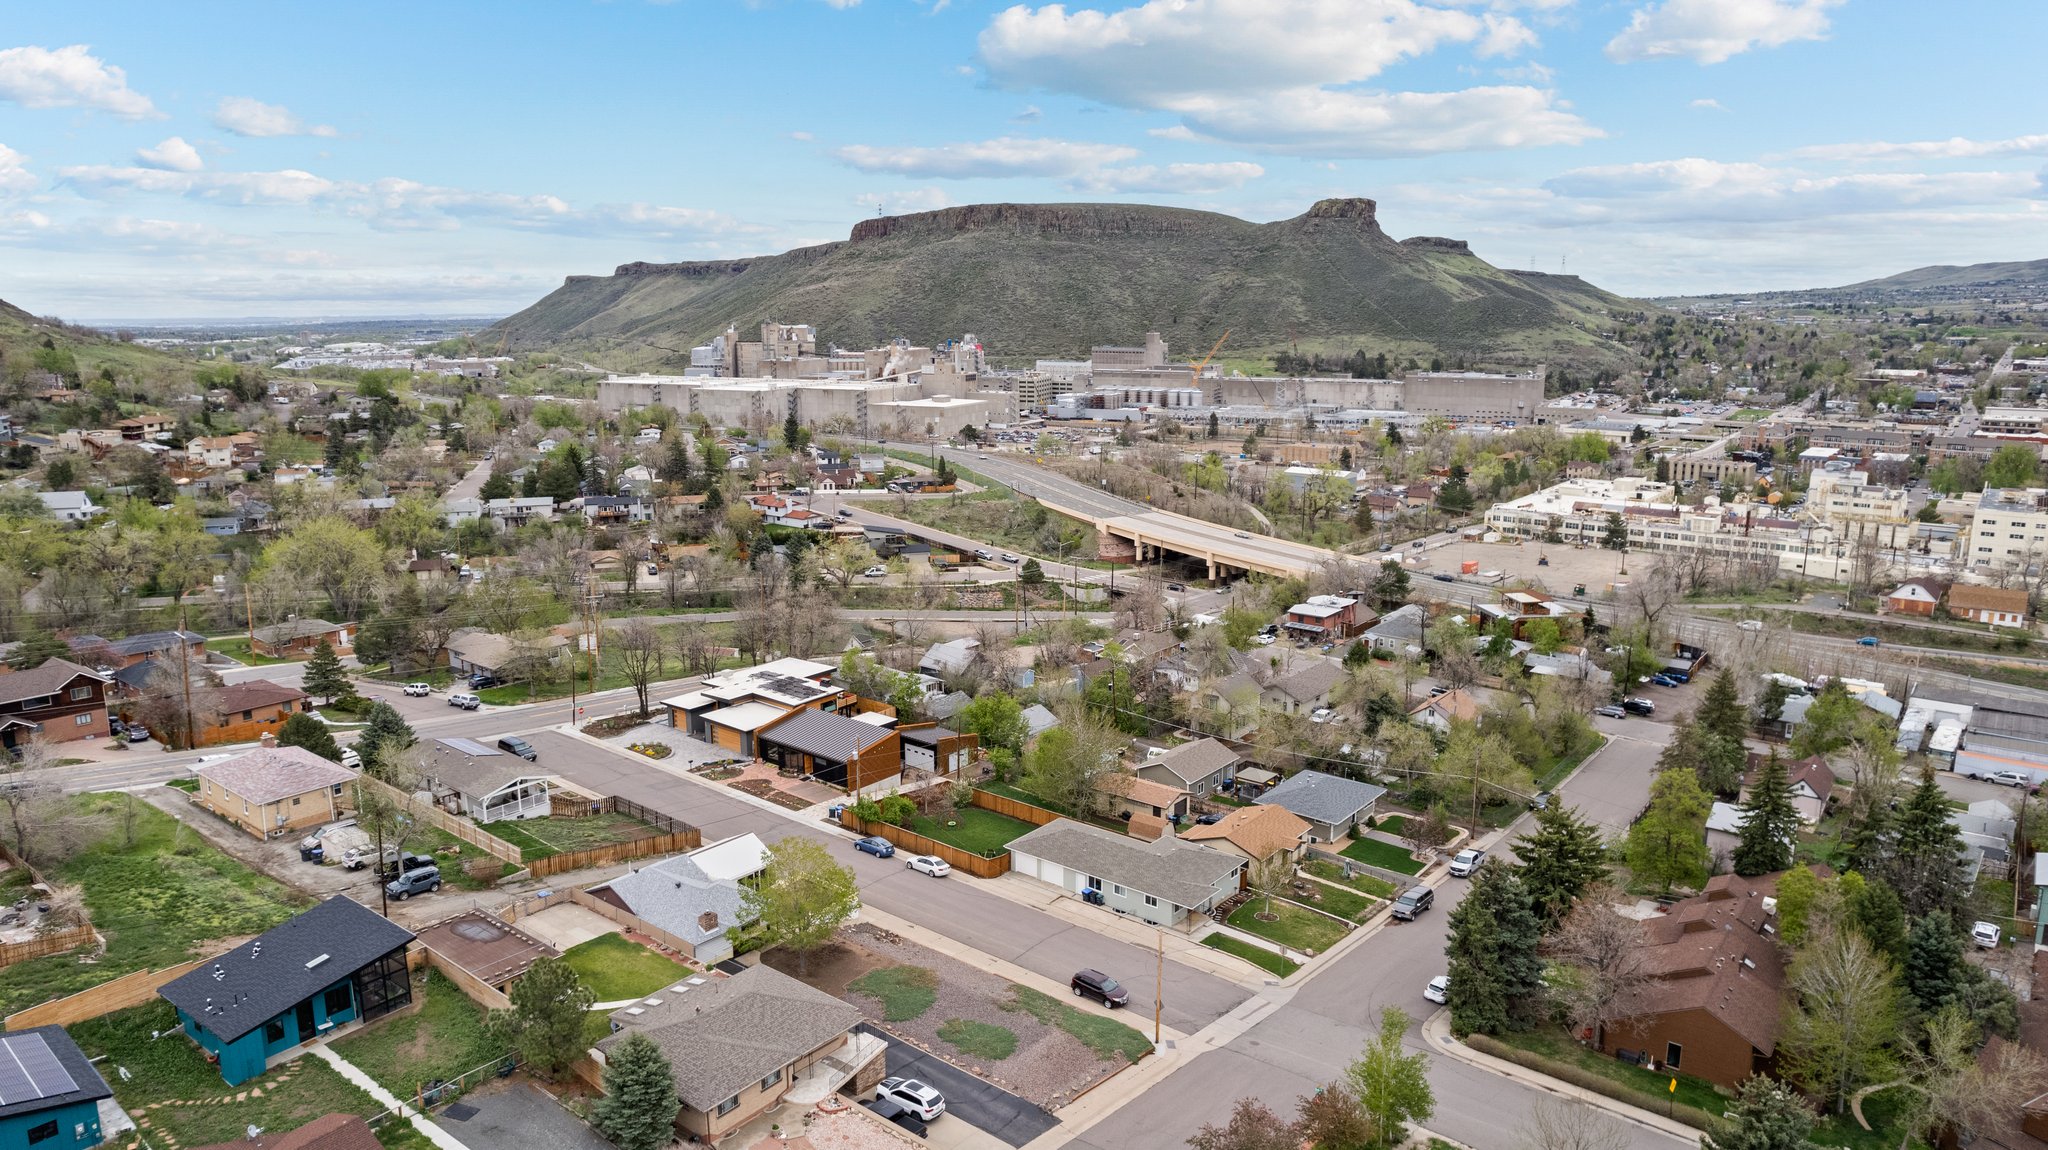 Optimal location near Coors Brewery, Colorado School of Mines, and walking distance to Downtown Golden